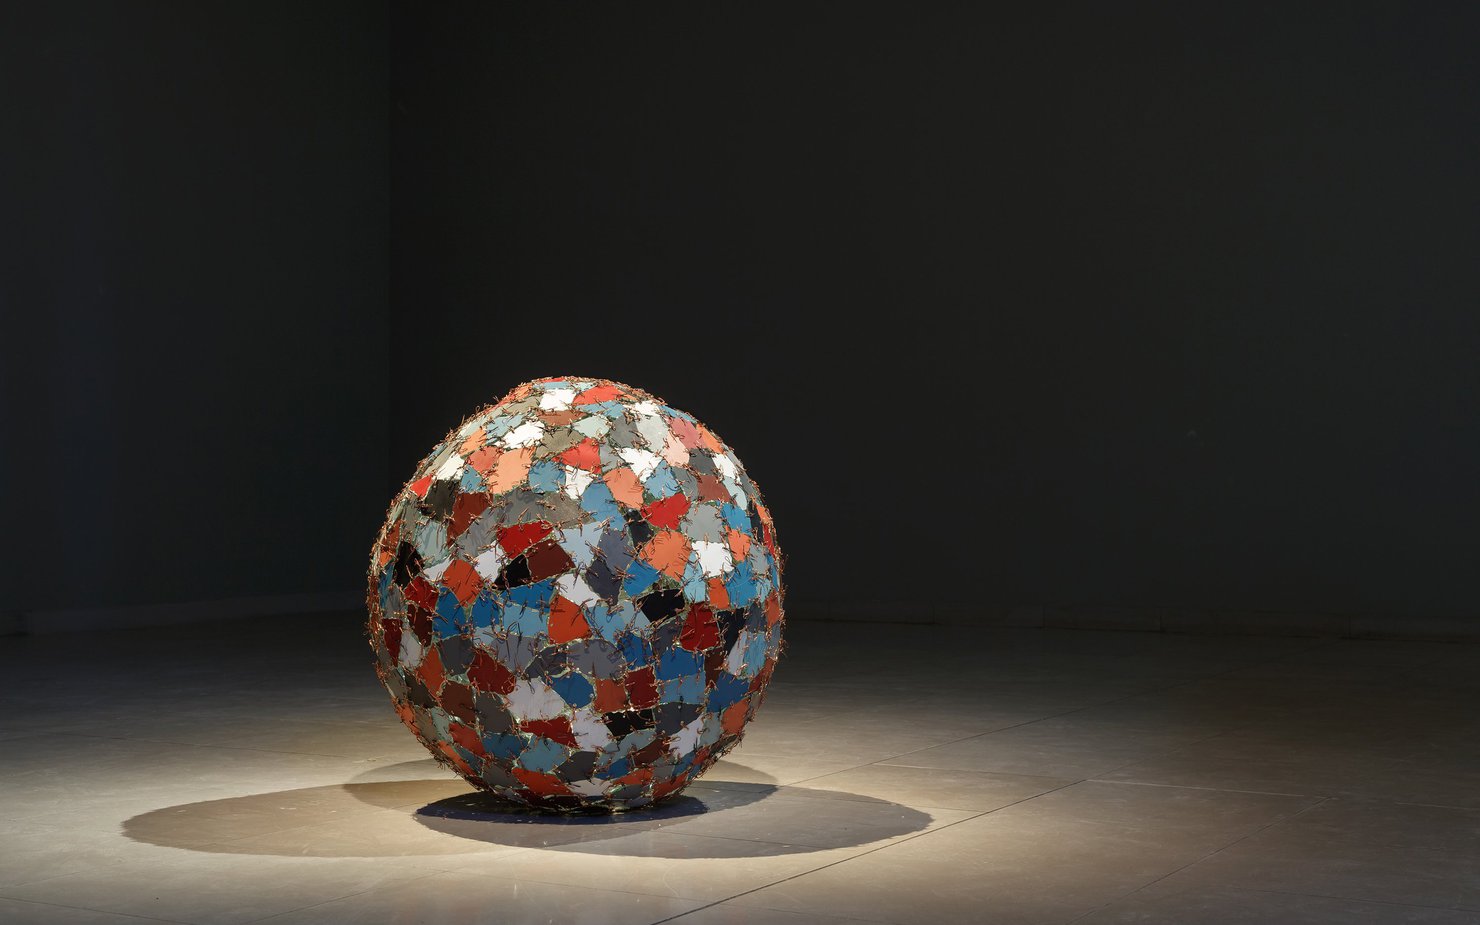 A spotlight on the object Chaos+Repair=Universe showcasing a sculpture with coloured mirror fragments stitched into a ball shape with metal wires